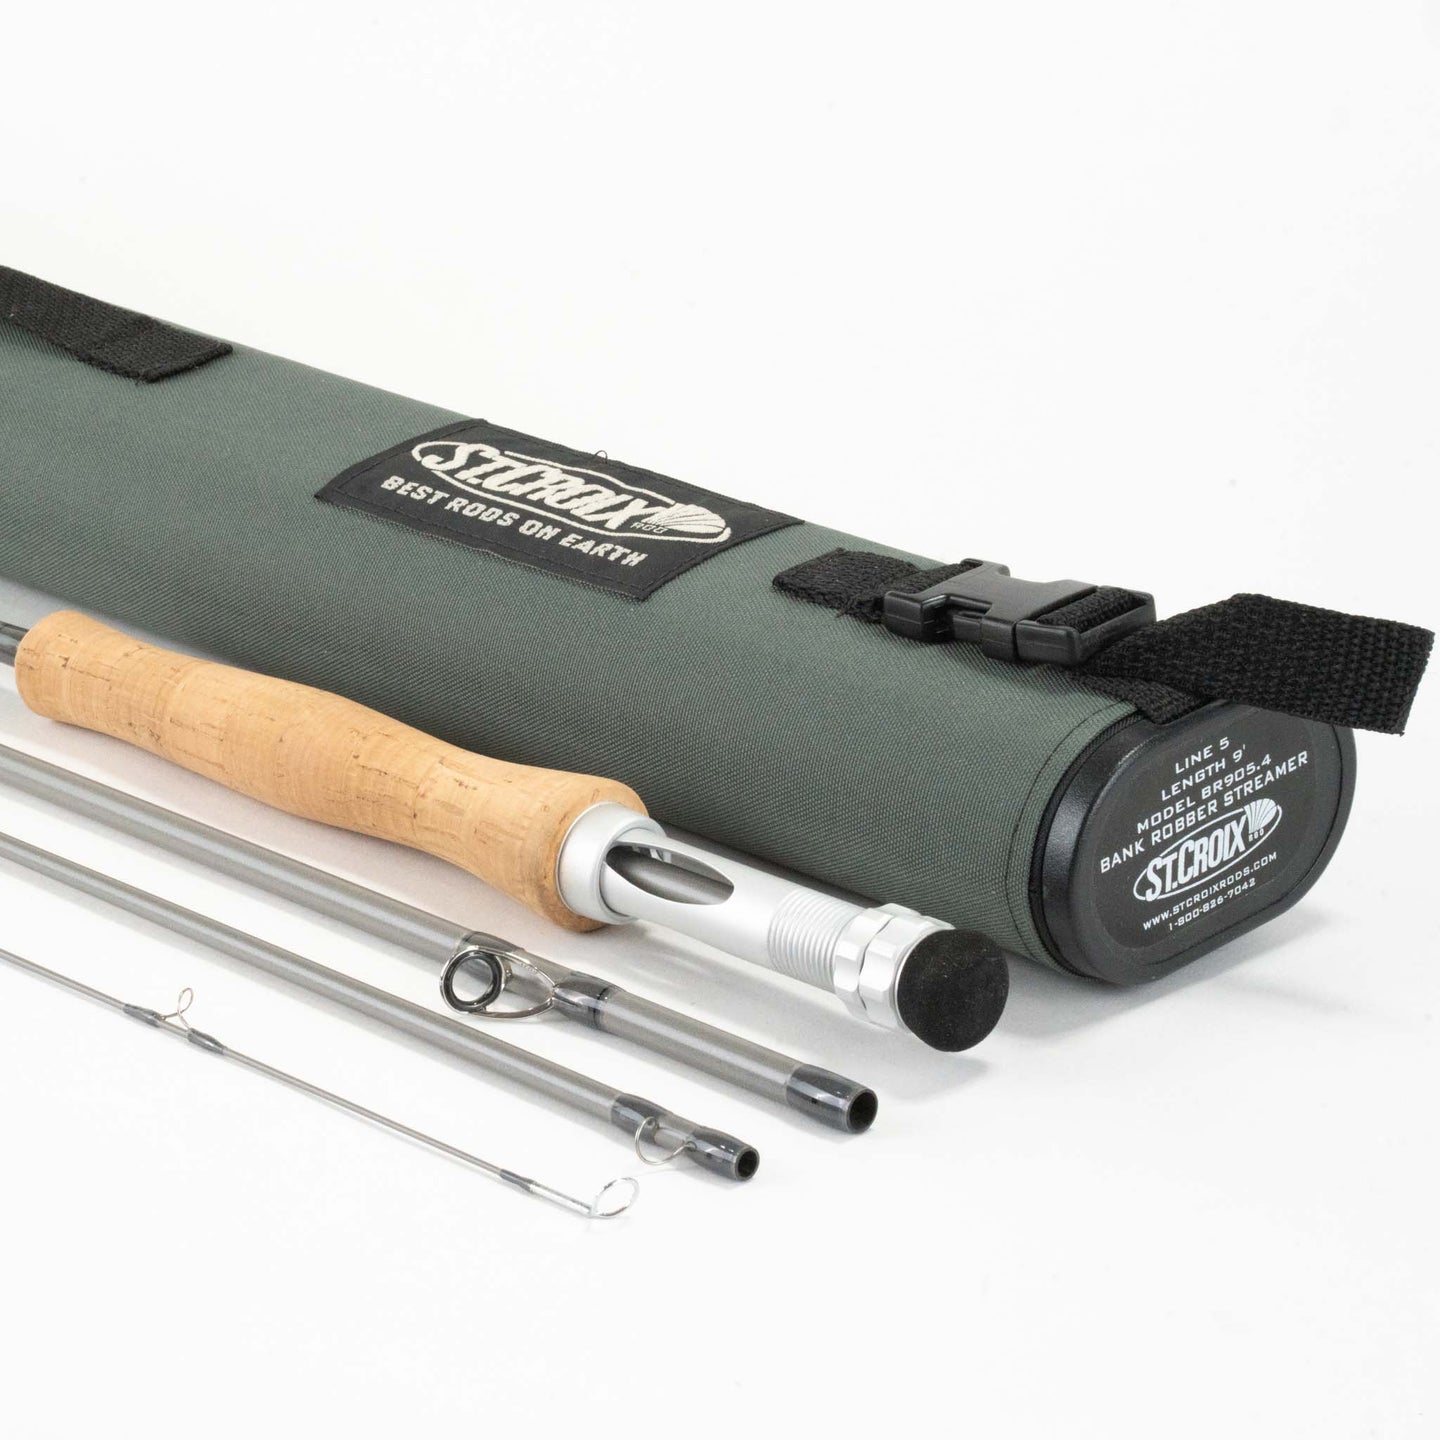 St Croix Bank Robber Streamer 590-4 Fly Rod - 5wt 9ft 0in 4pc